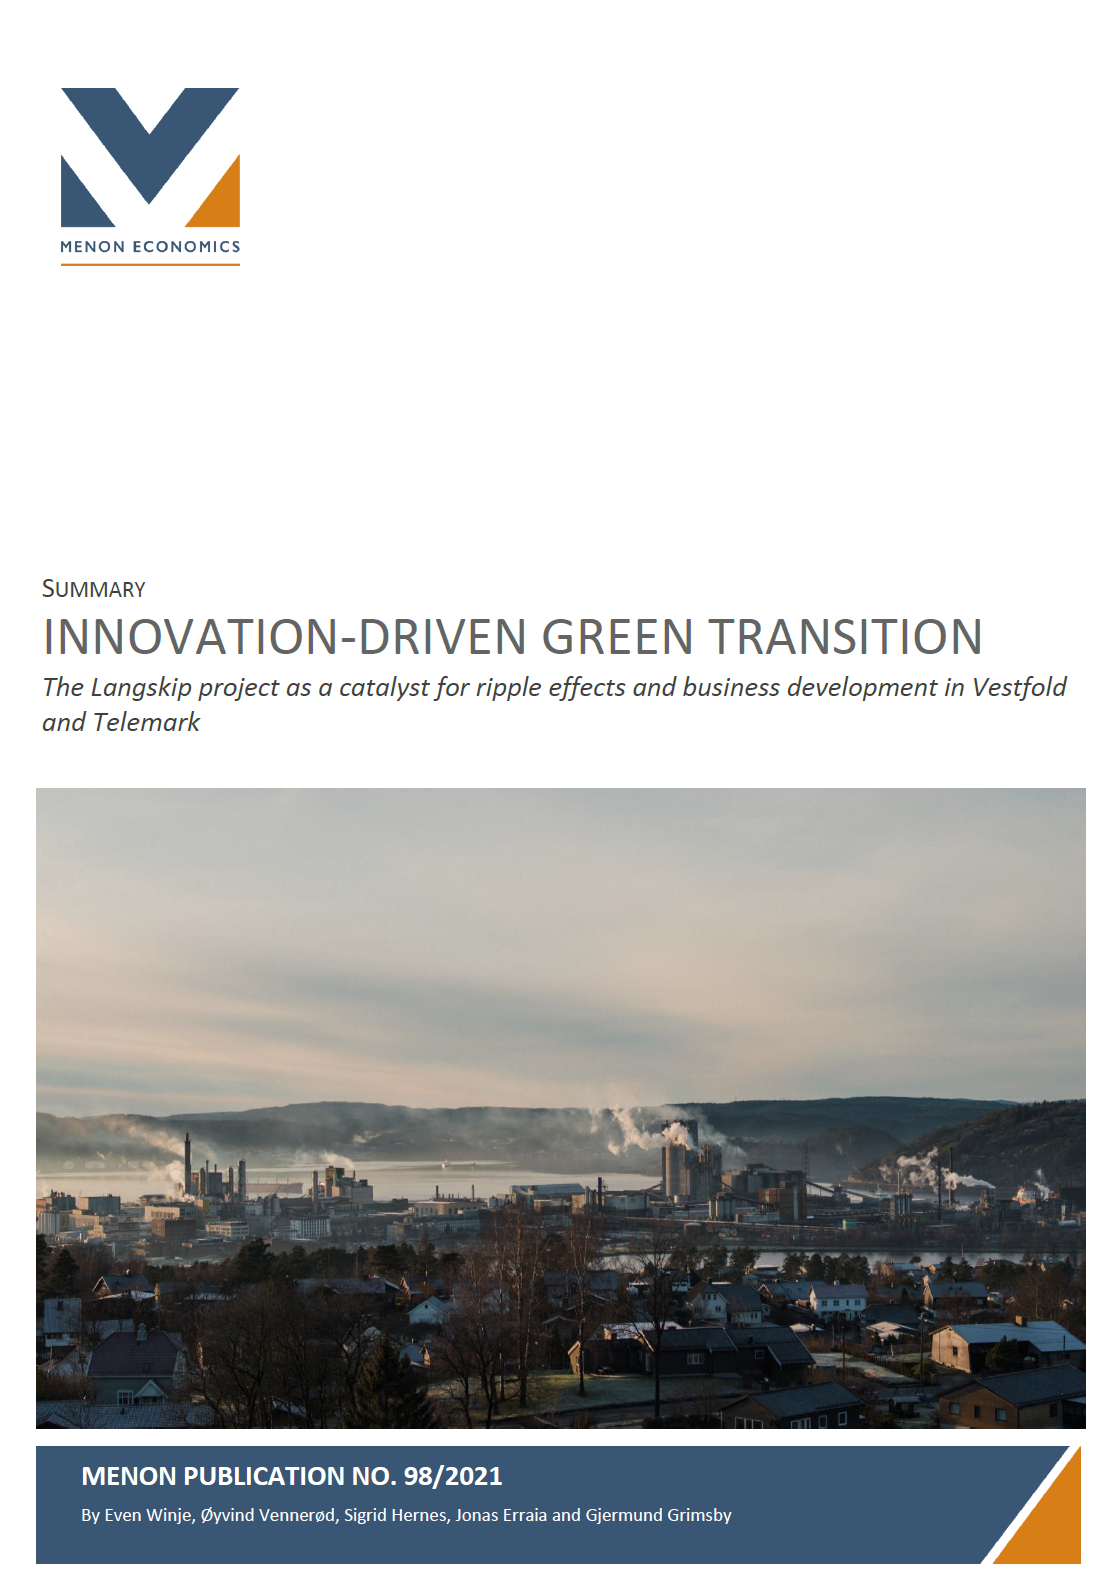 Innovation-driven green transition – The langskip project as a catalyst for ripple effects and business development in Vestfold and Telemark